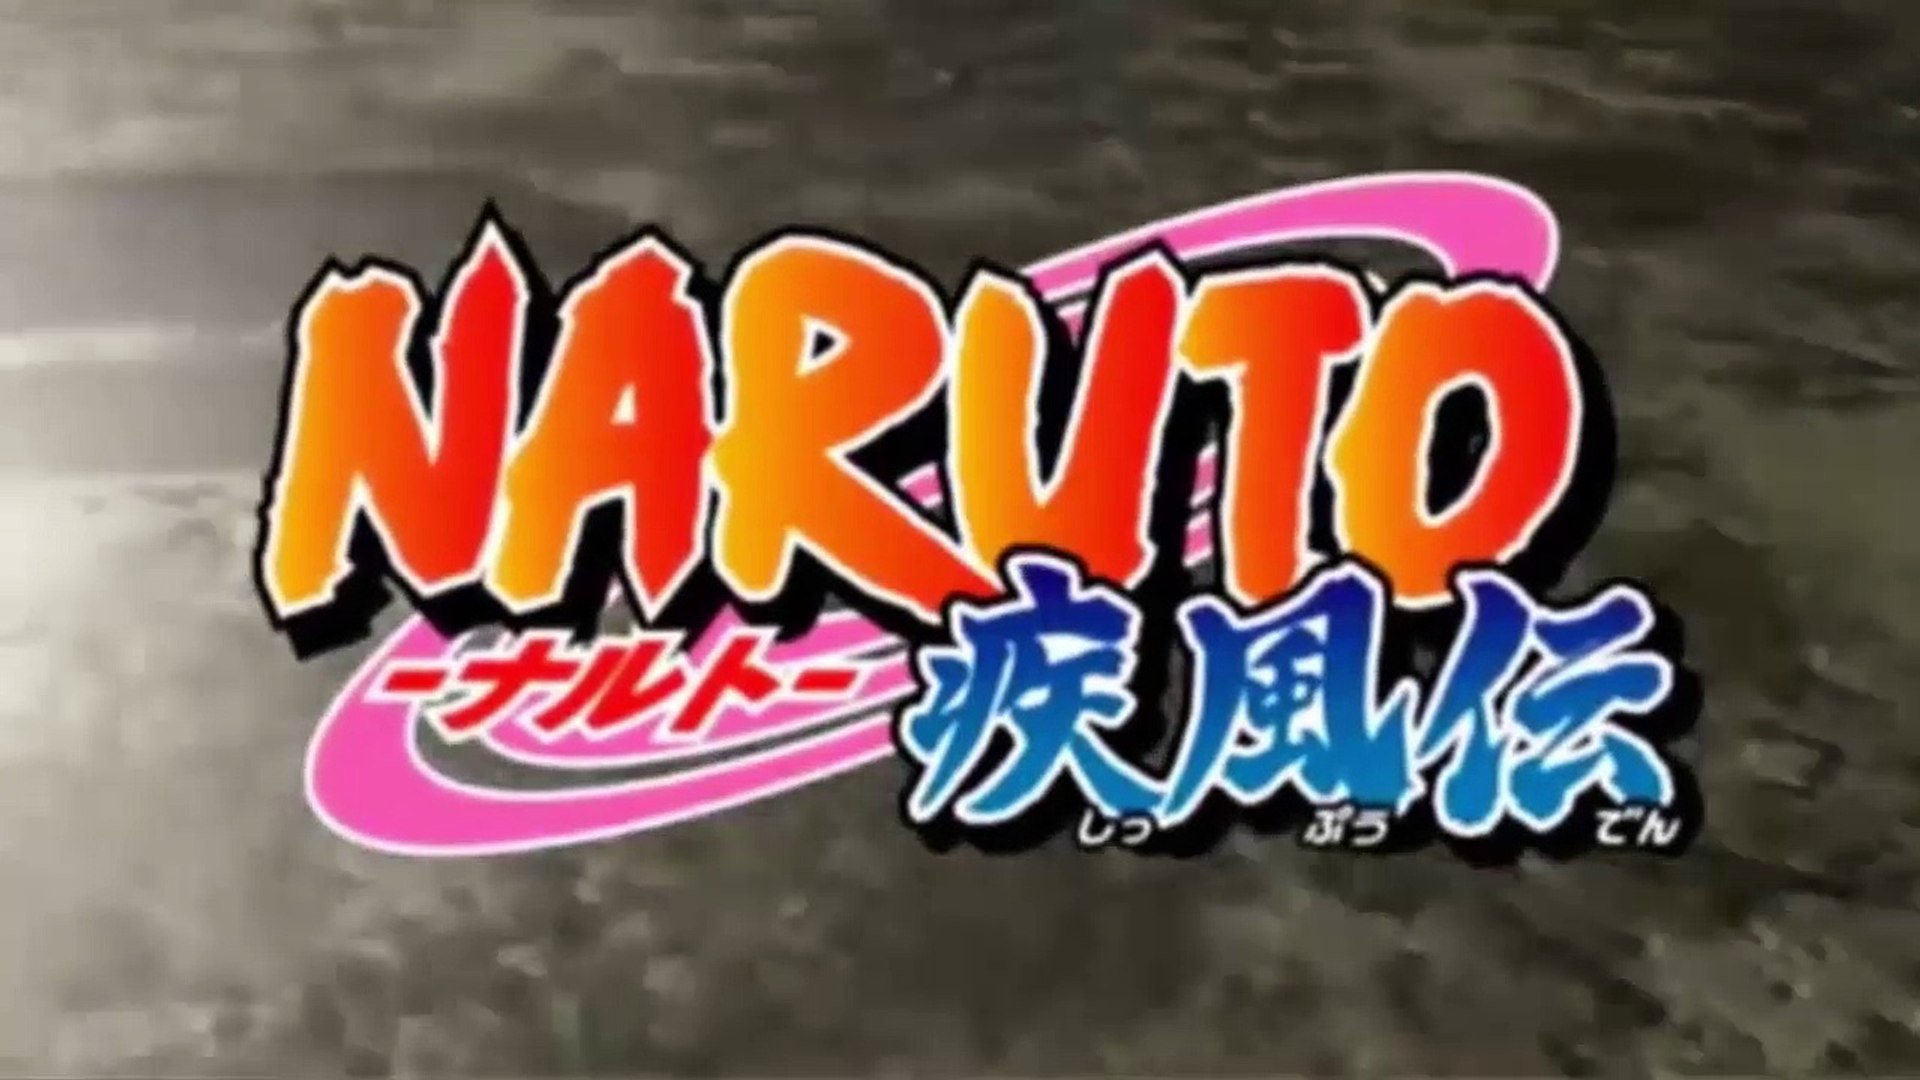 Naruto Shippuden Opening 1 Heros Come Back!! by Anthony999 - Tuna